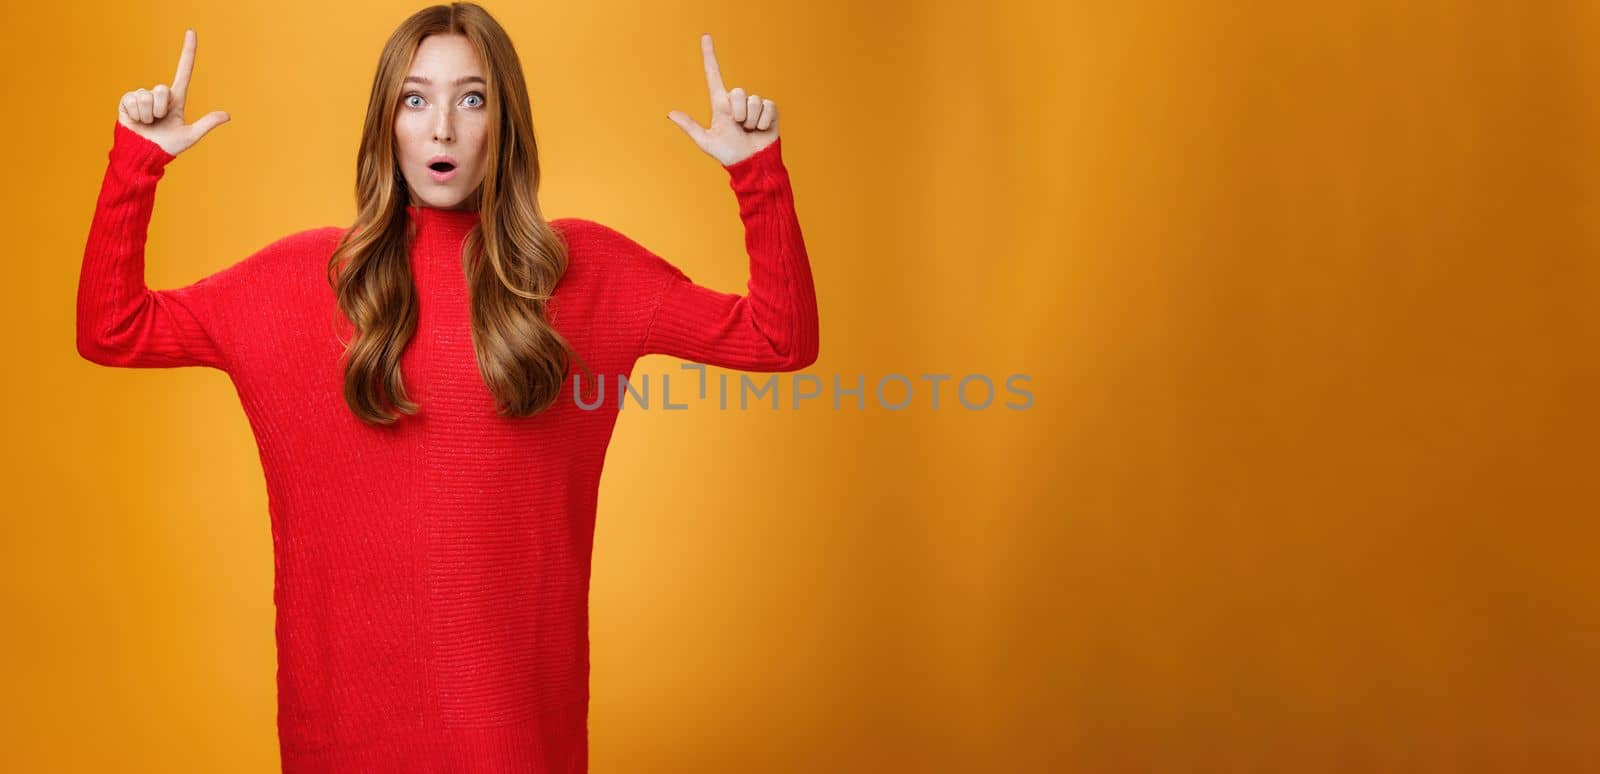 Lifestyle. Portrait of attractive and stylish redhead 25s female in knitted red dress gasping from amazement open mouth questioned and surprised as pointing up at astonishing promotion over orange wall.